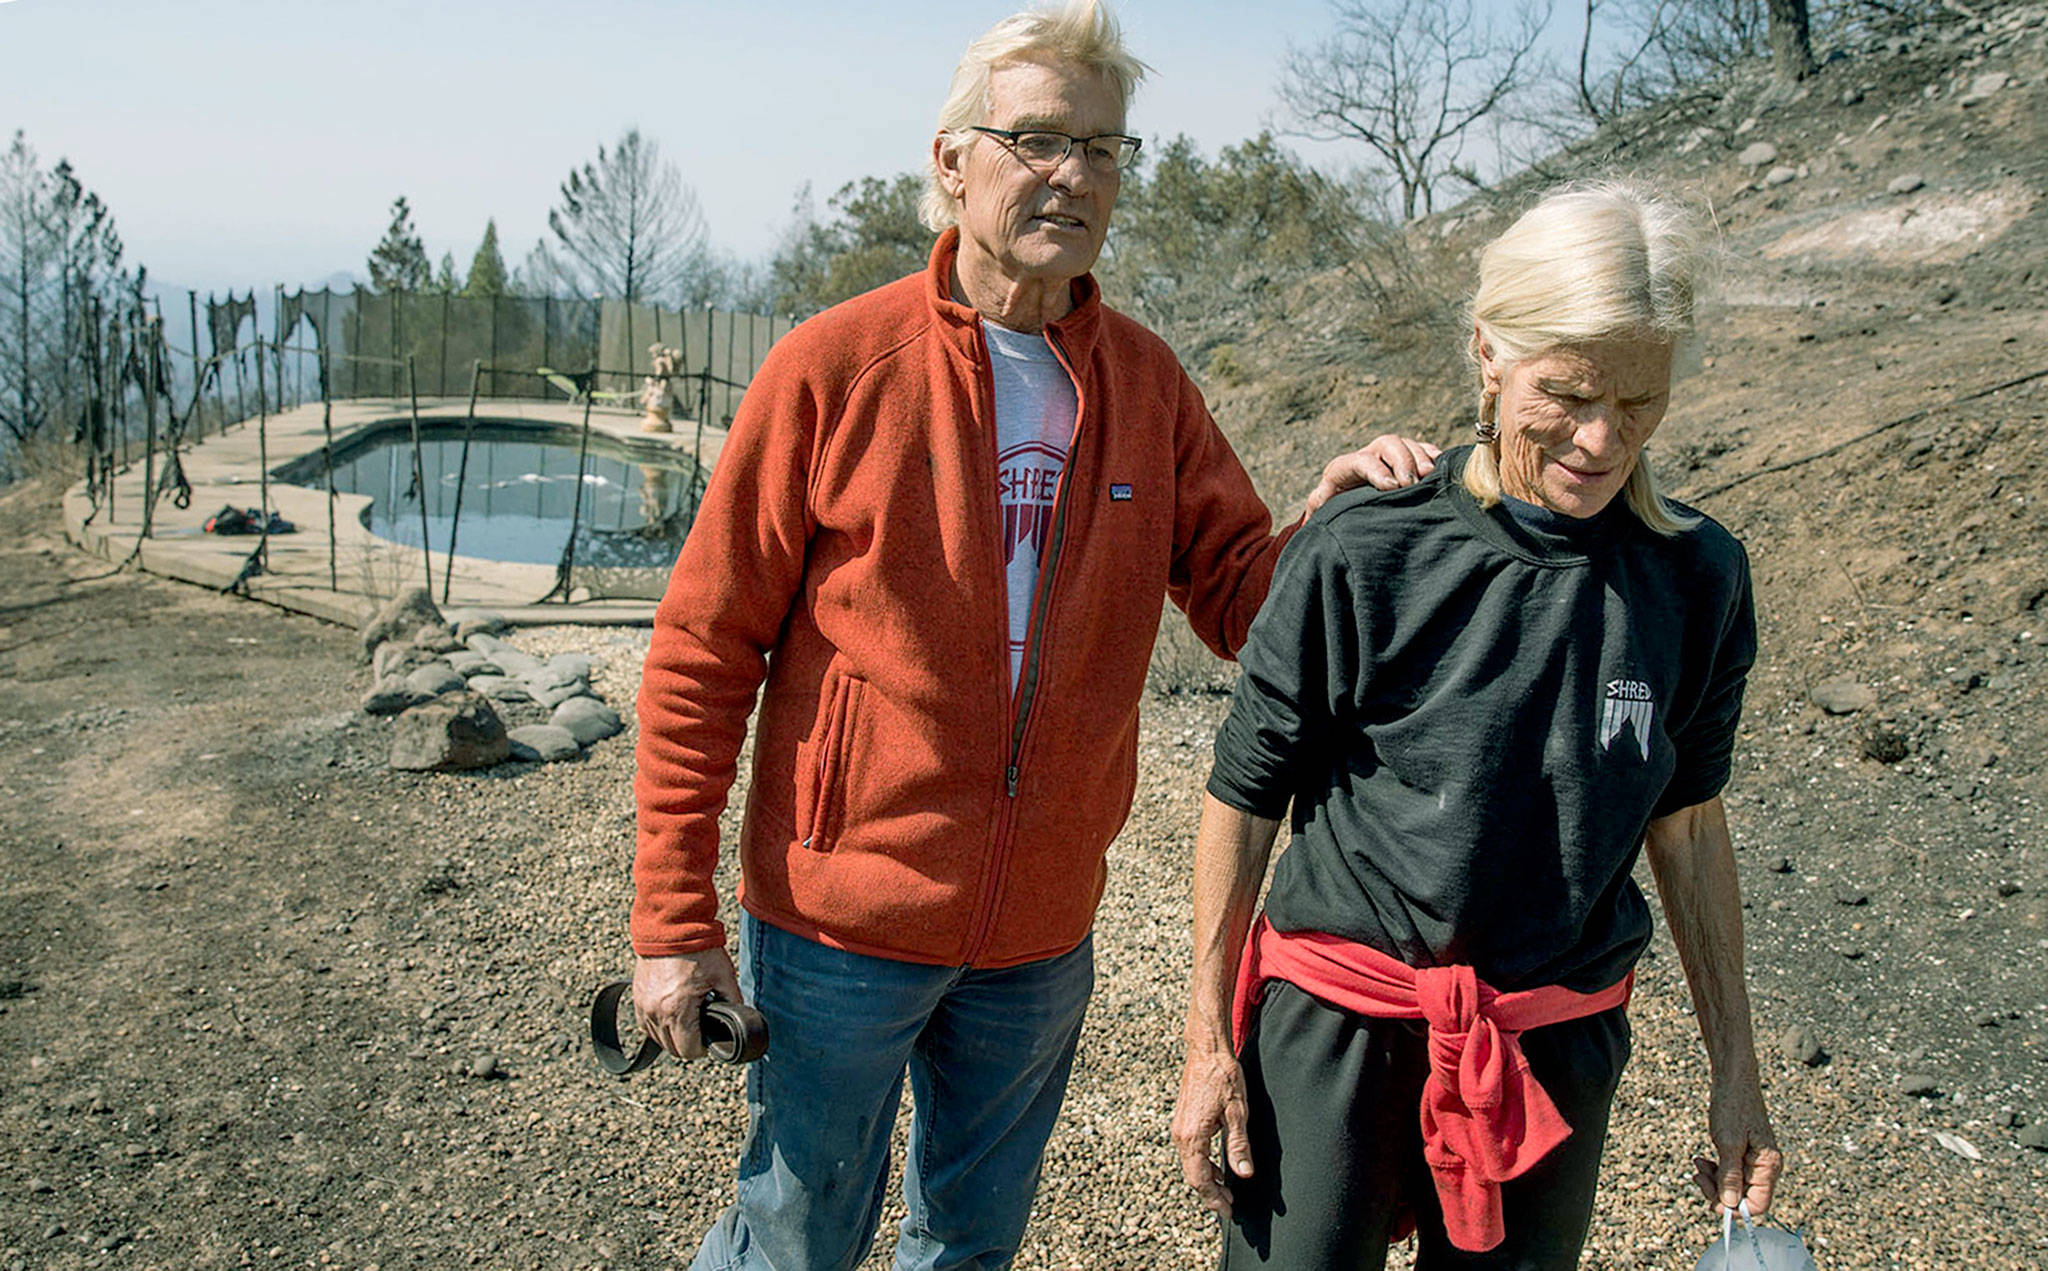 John and Jan Pascoe survived a firestorm Monday by running out of their home and into their neighbors’ swimming pool in Santa Rosa, California. (Brian van der Brug/Los Angeles Times/TNS)